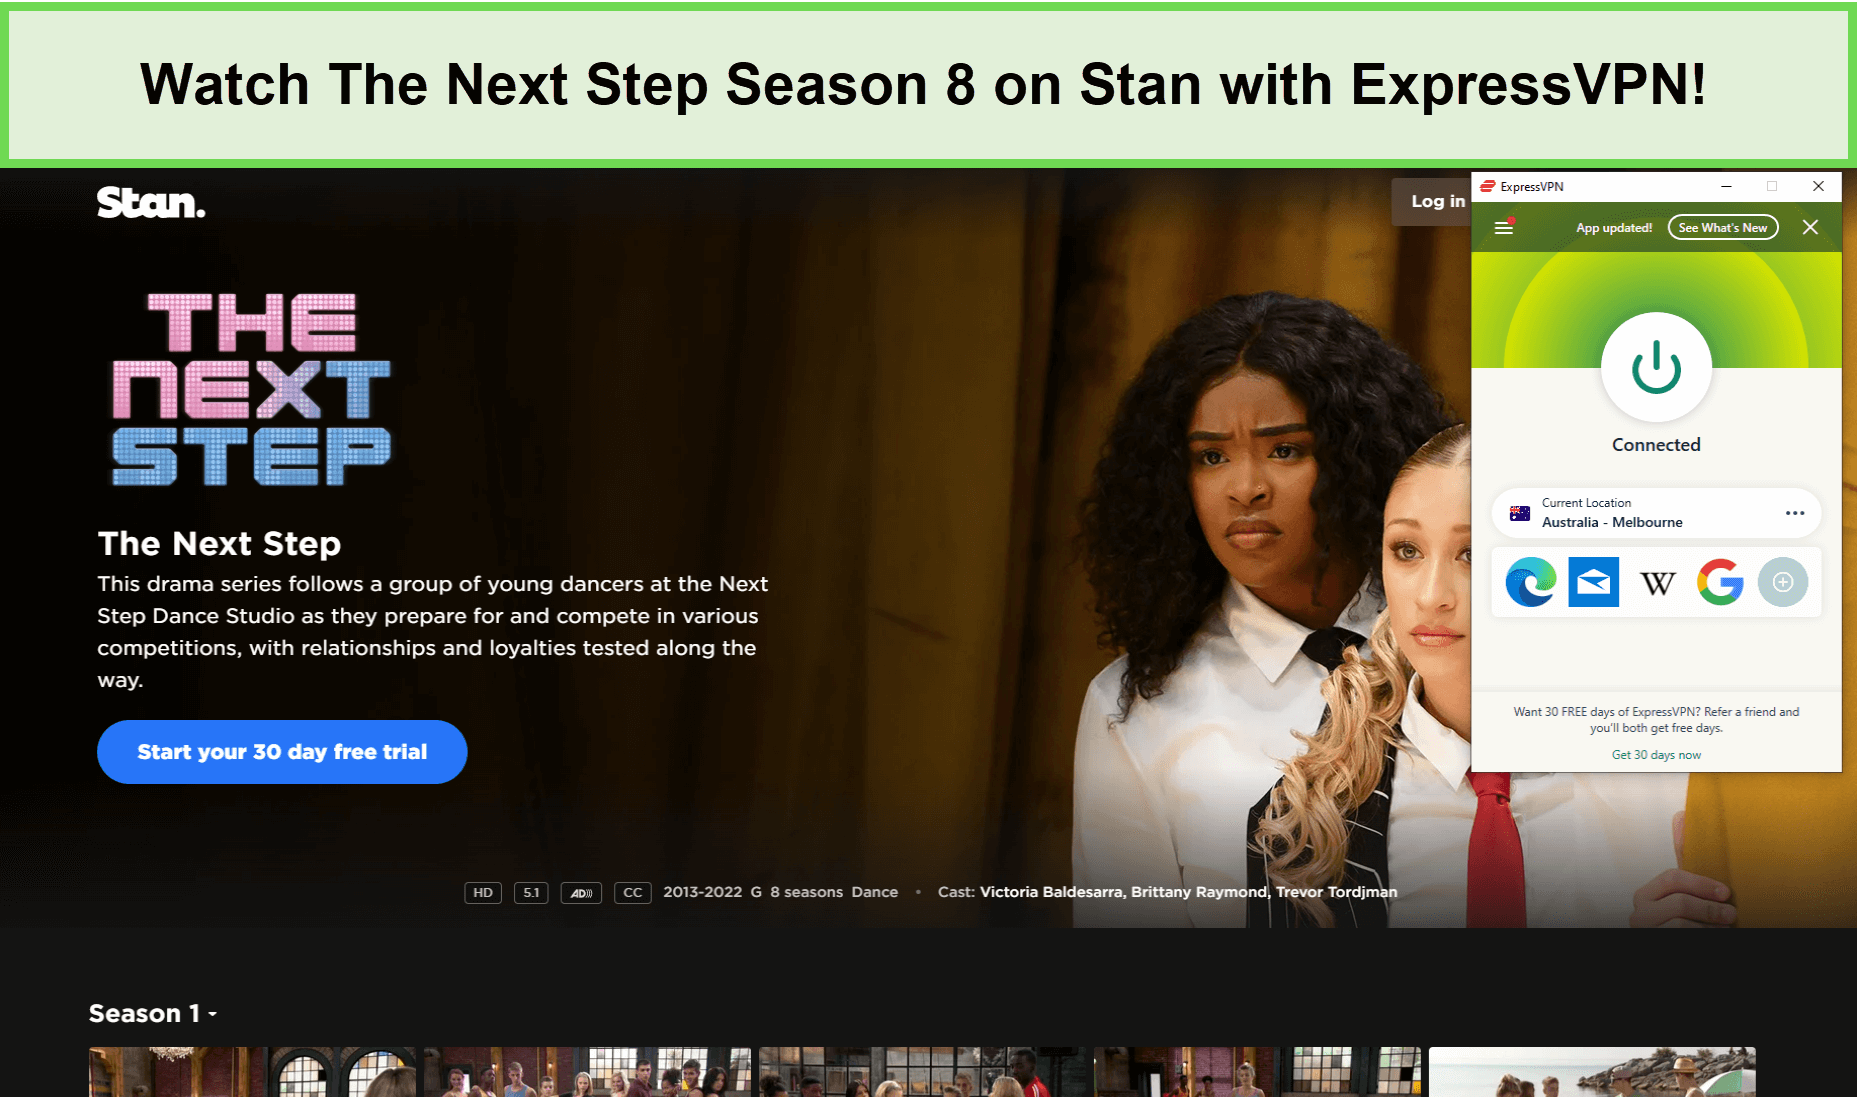 Watch-The-Next-Step-Season-8-in-USA-on-Stan-with-ExpressVPN